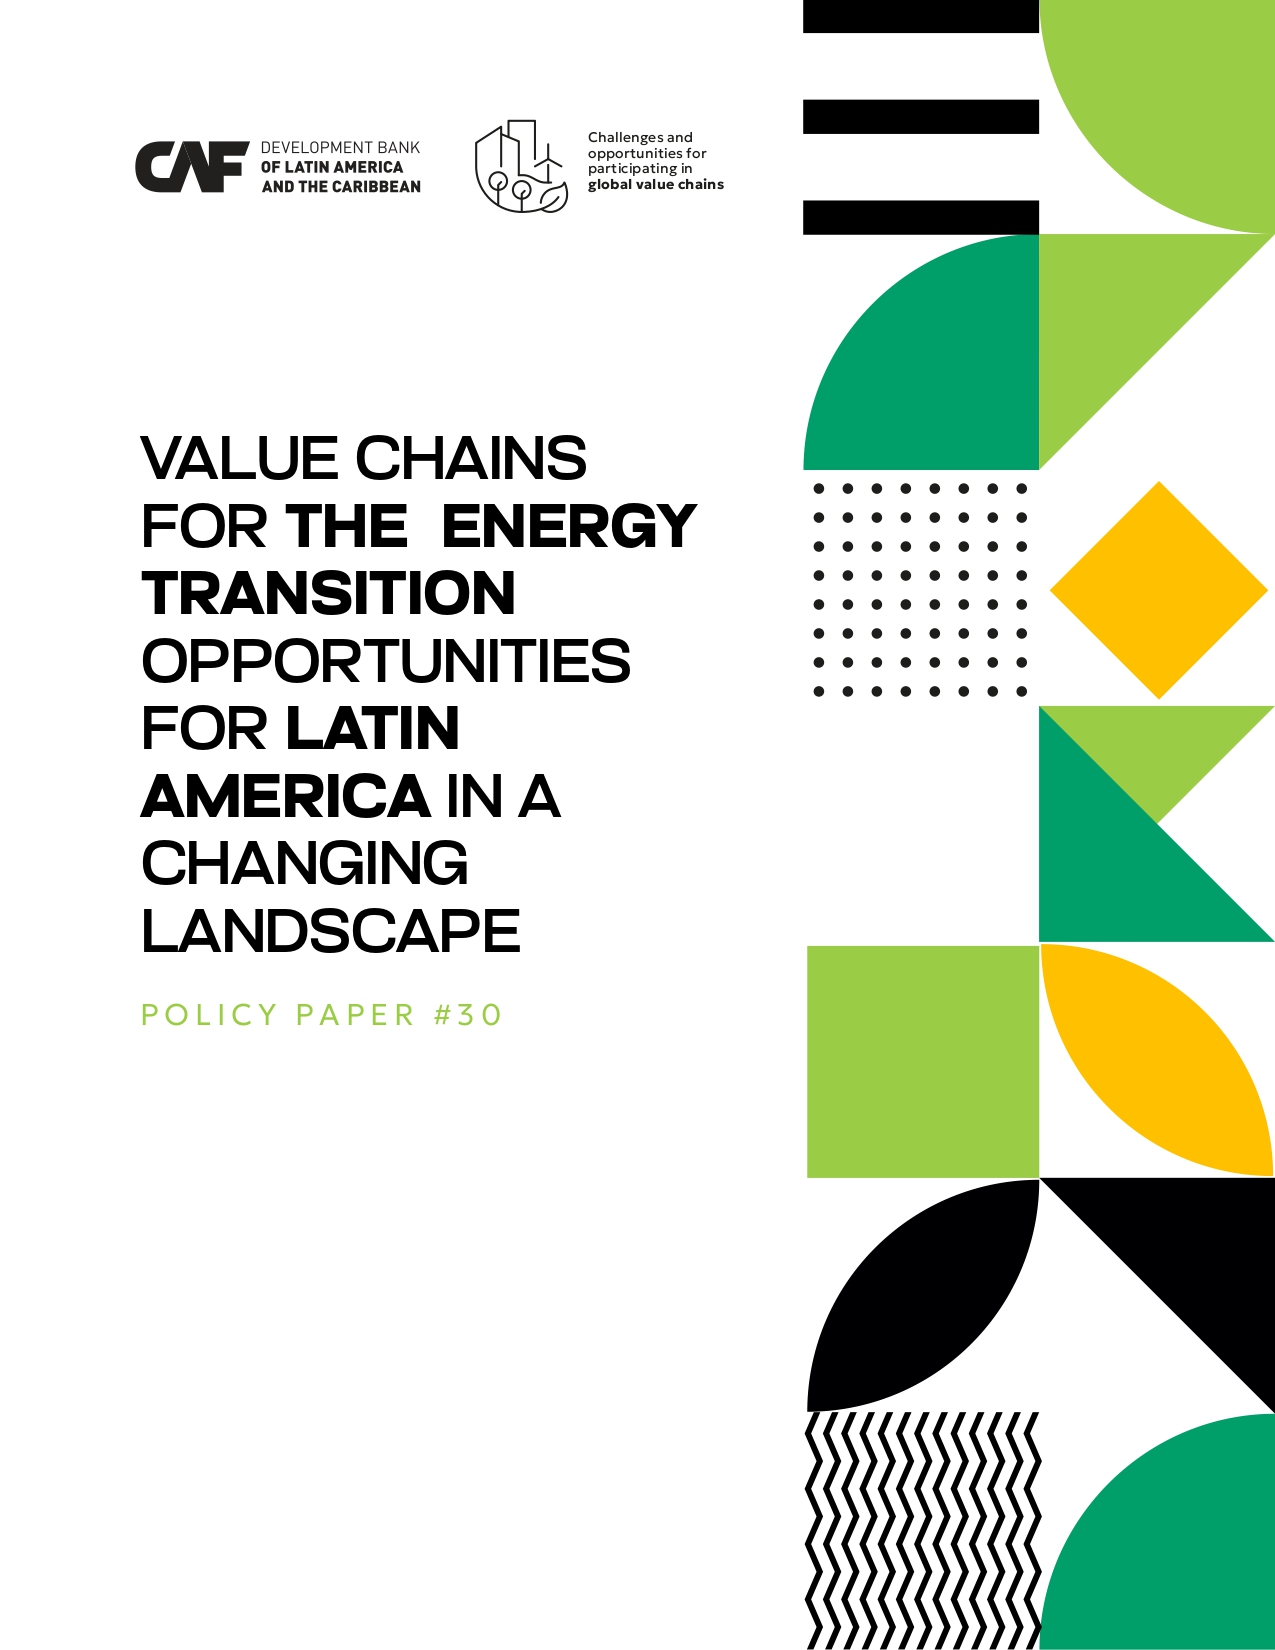 Value Chains for the Energy Transition Opportunities for Latin America in a Changing Landscape